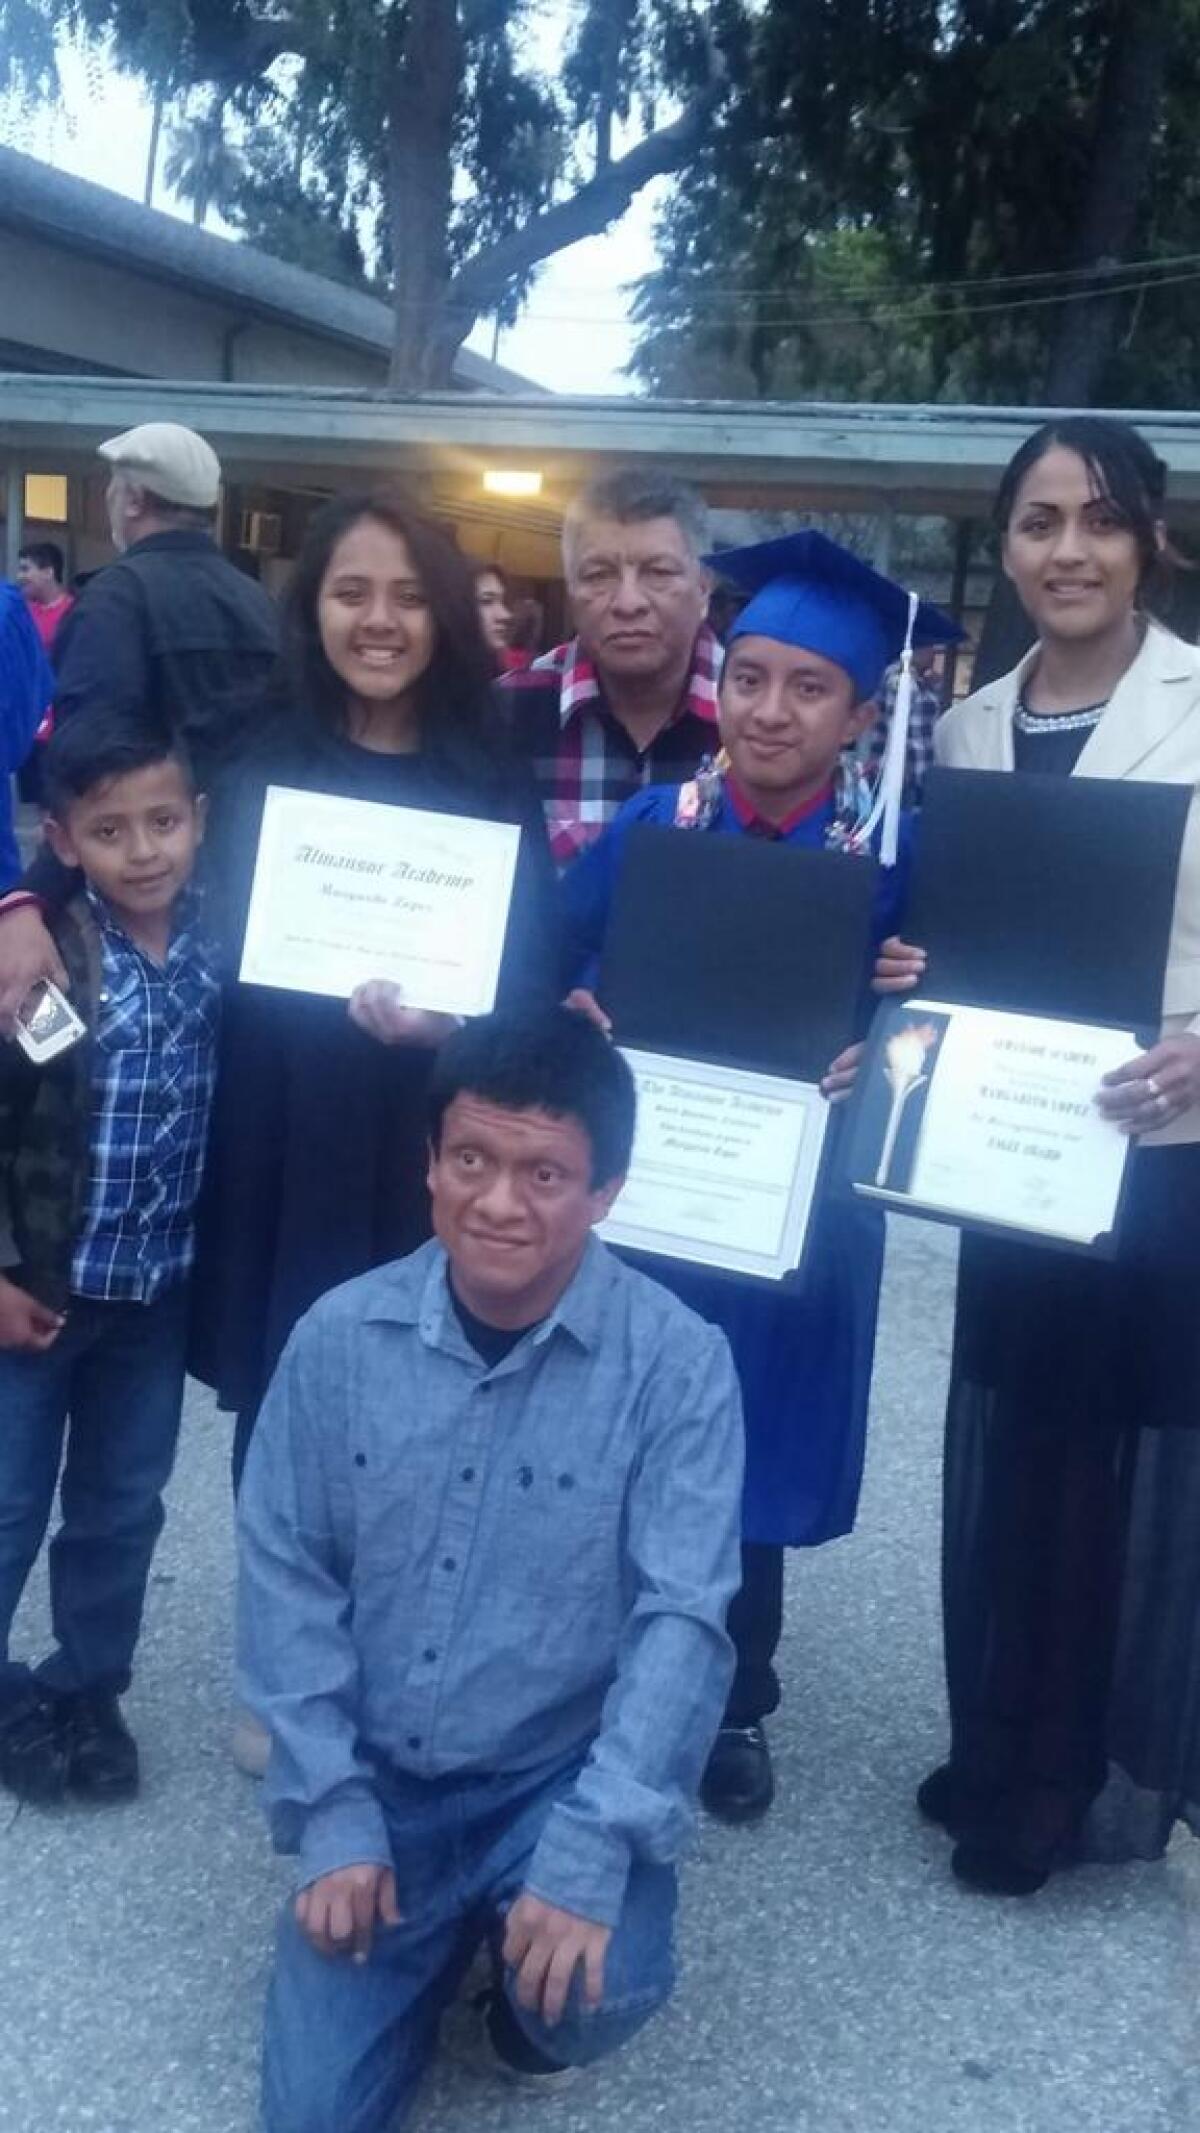 A high school graduate poses with his family